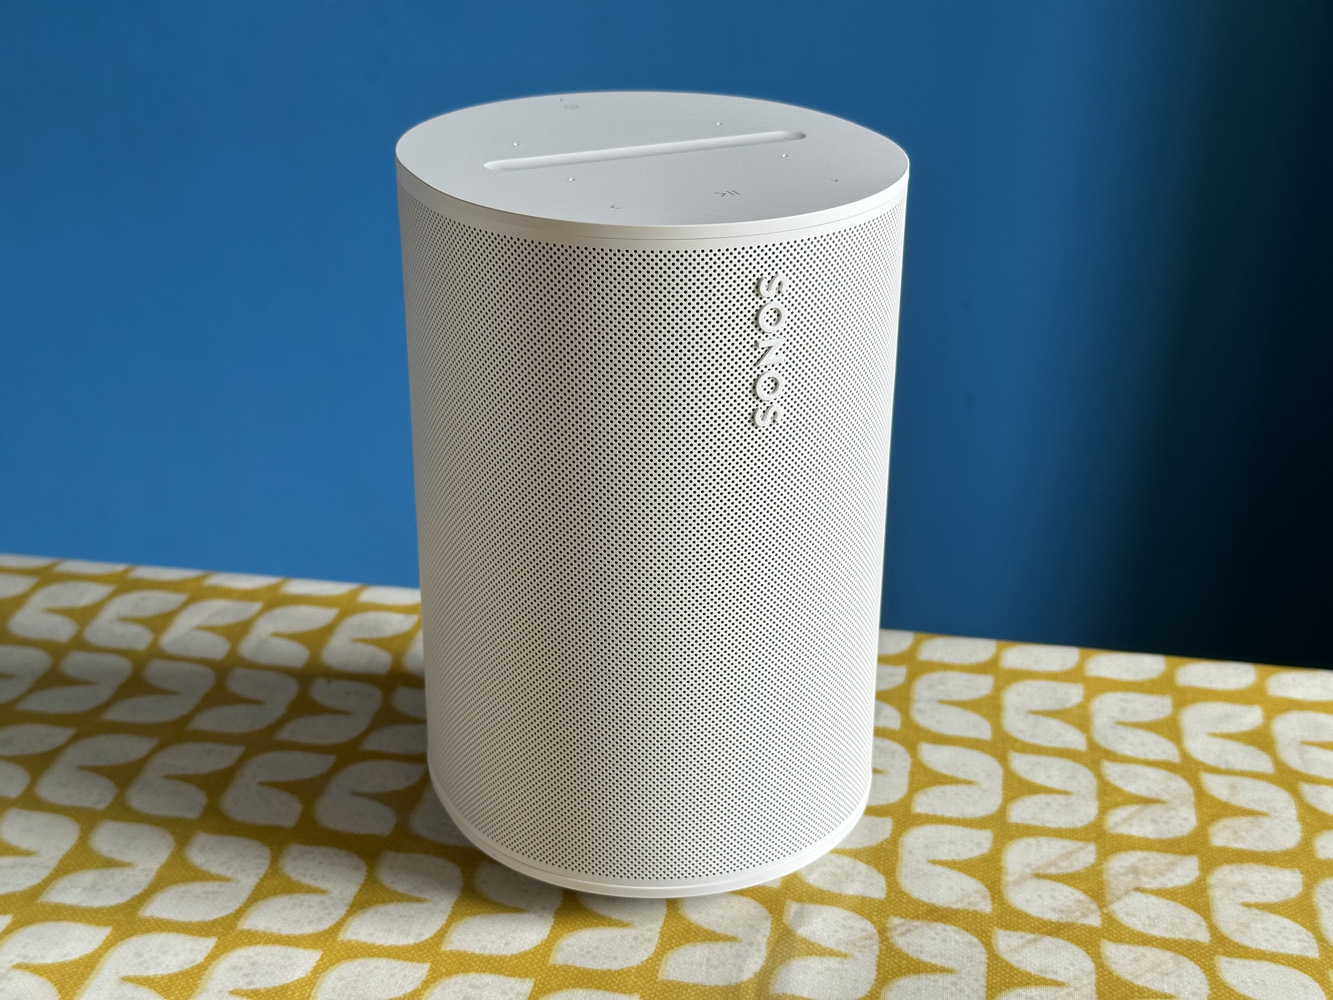 Why the Sonos Era 100 is more than you think 